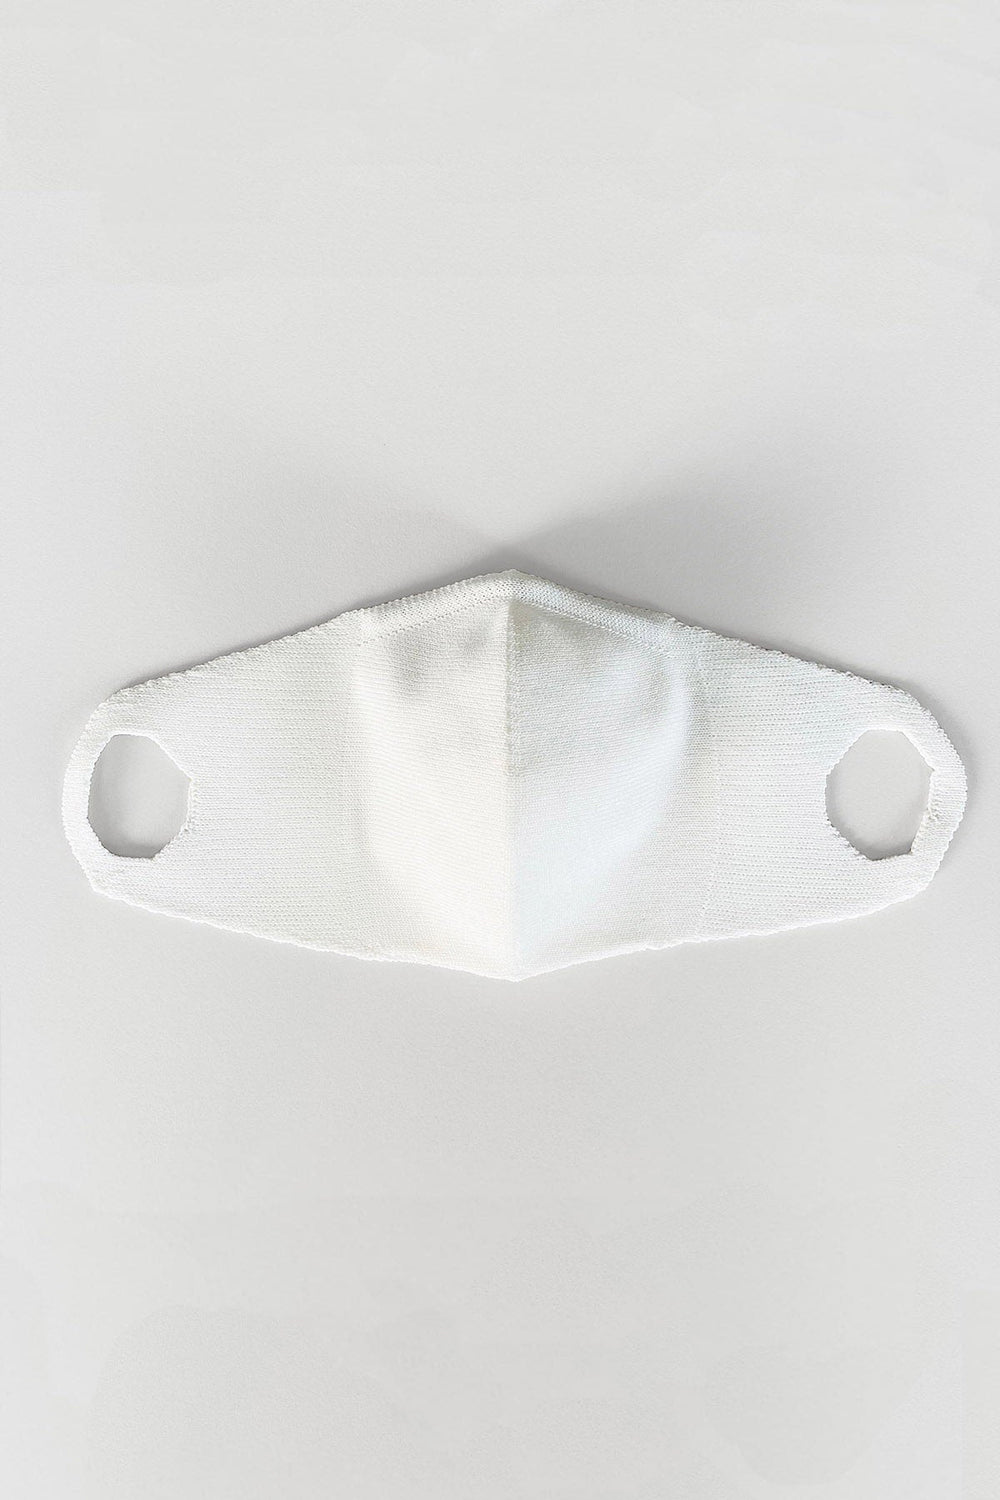 ANTIBACTERIAL AND REUSABLE FACE MASK IN CREAM